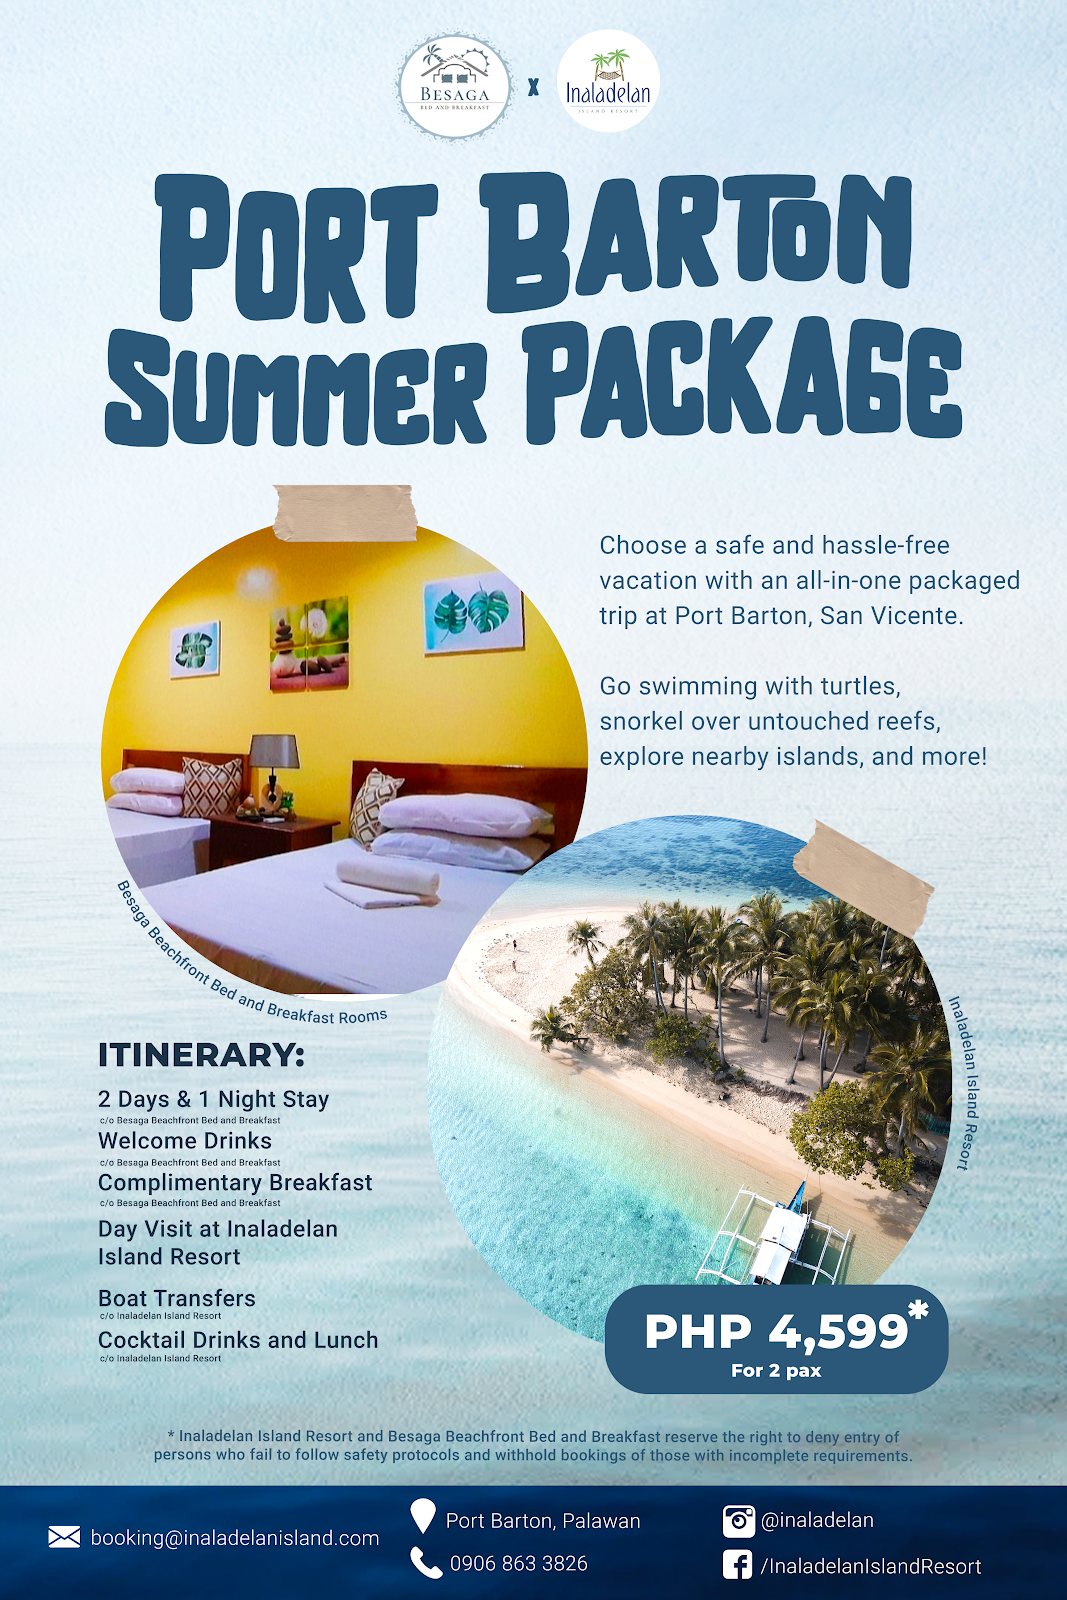 A Hassle-Free Summer at Port Barton! | The Scoop Asia